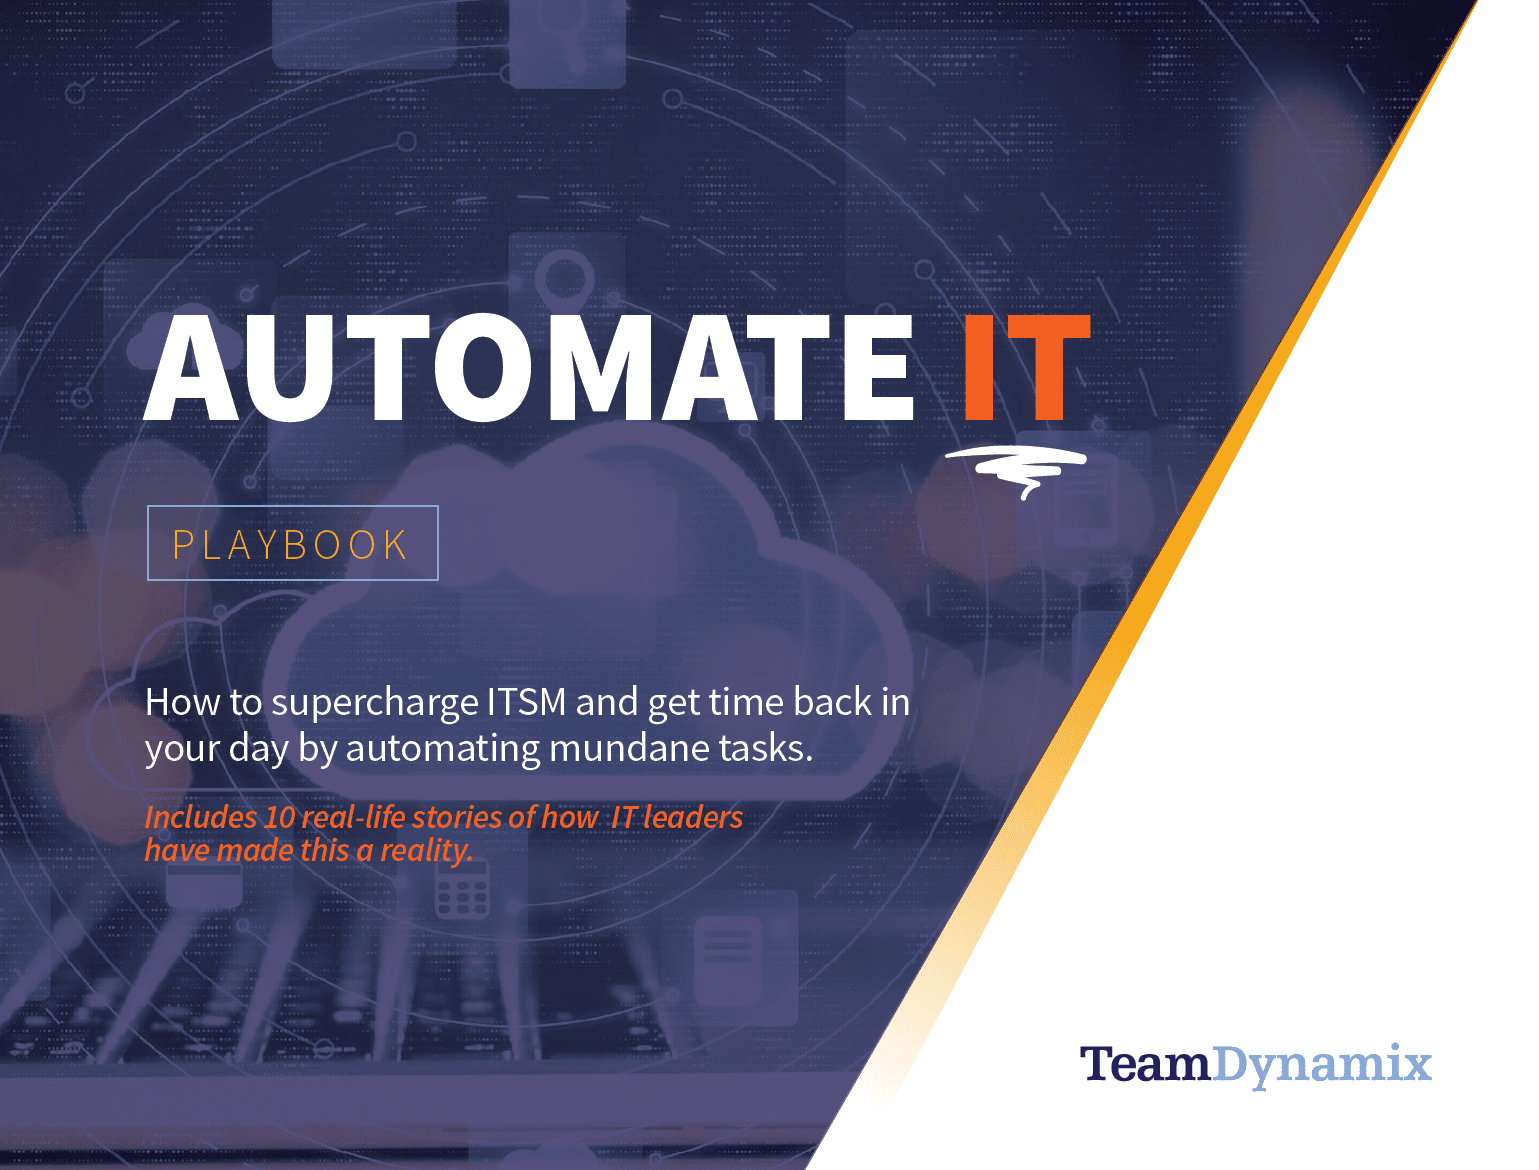 Automate IT – A Playbook for Supercharged ITSM